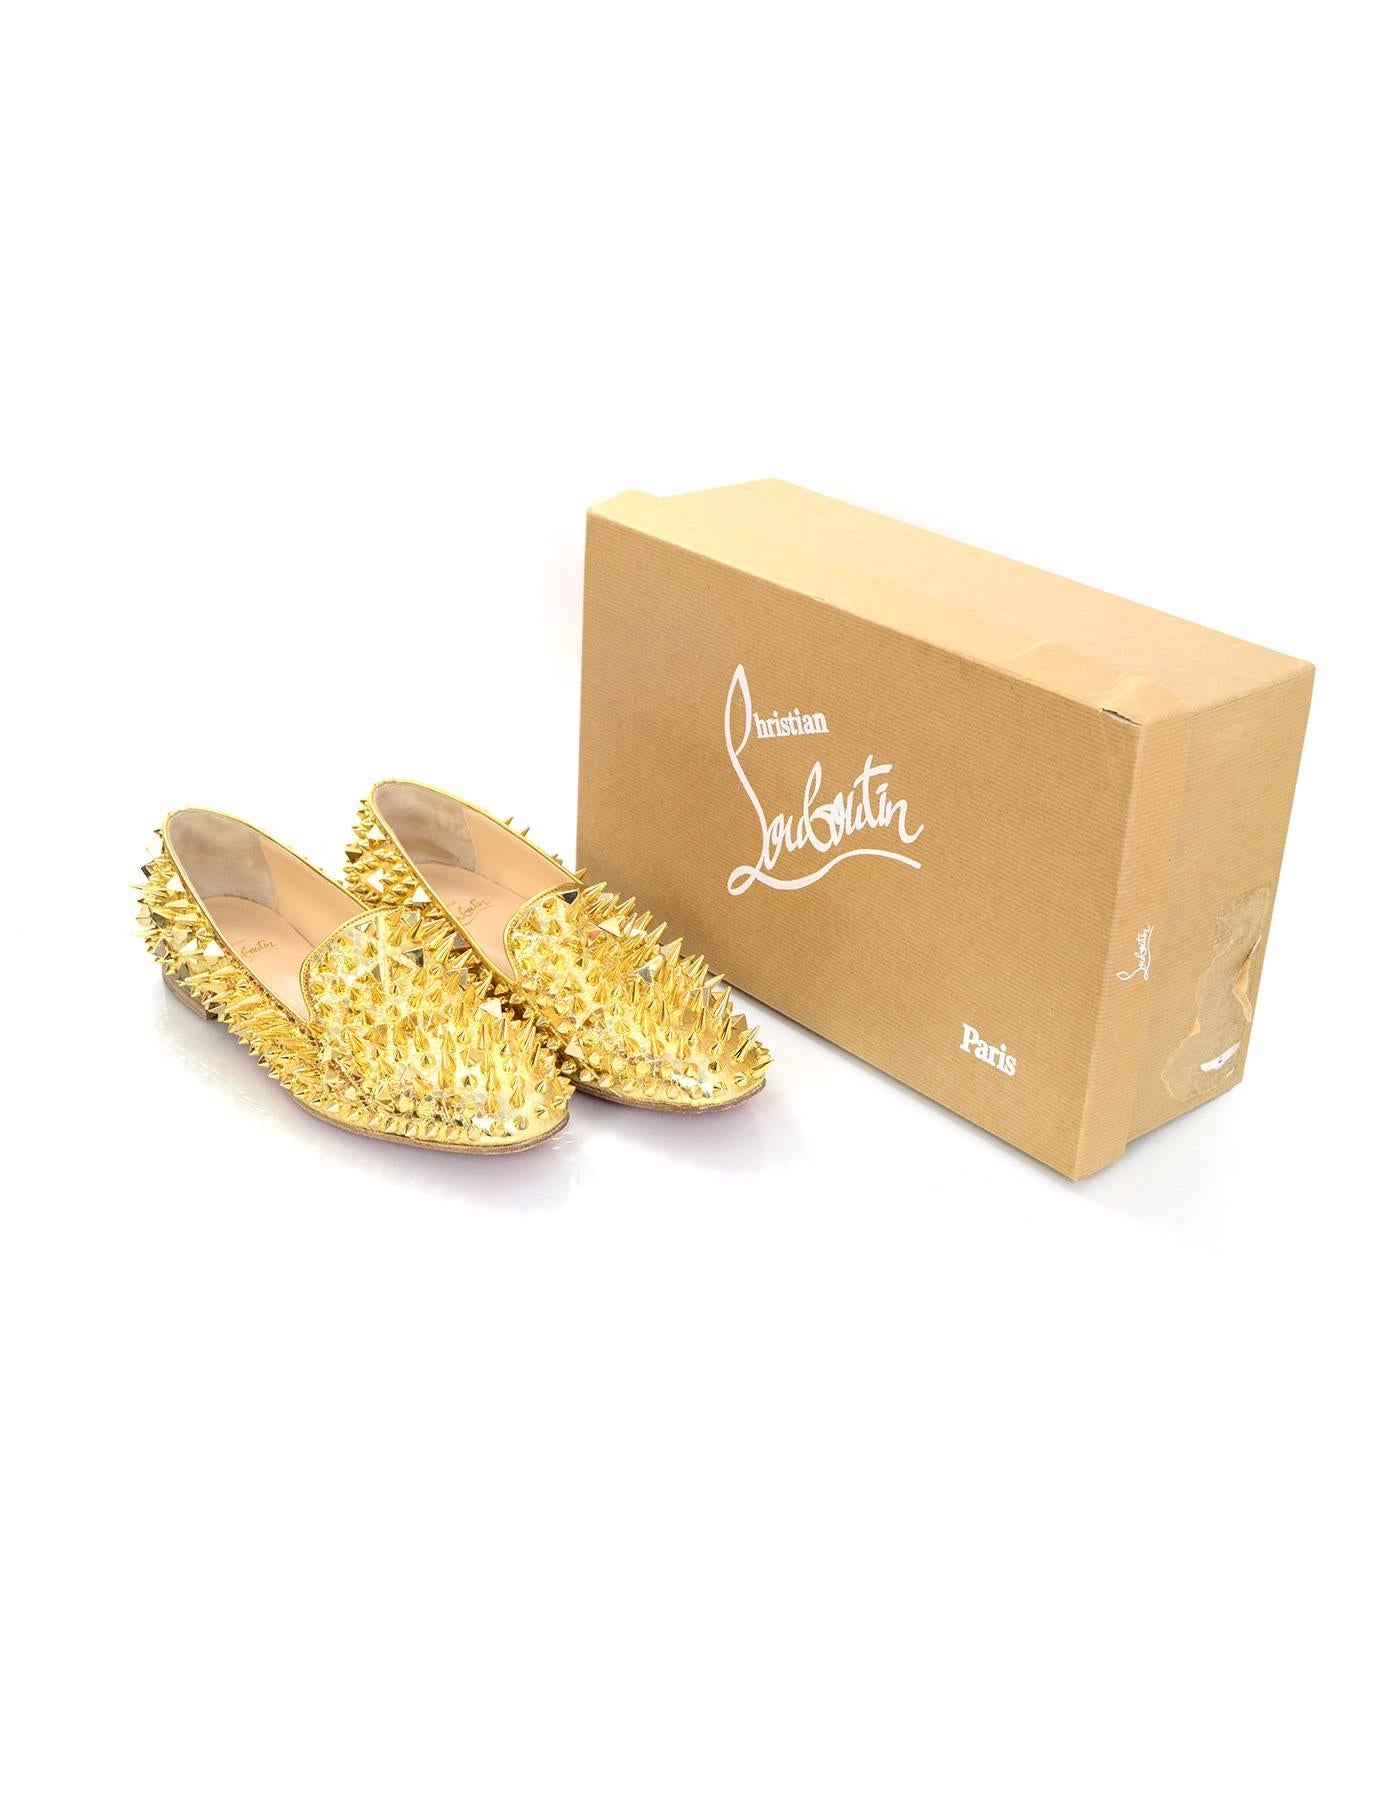 Christian Louboutin Gold Spiked Loafers Sz 38.5 1